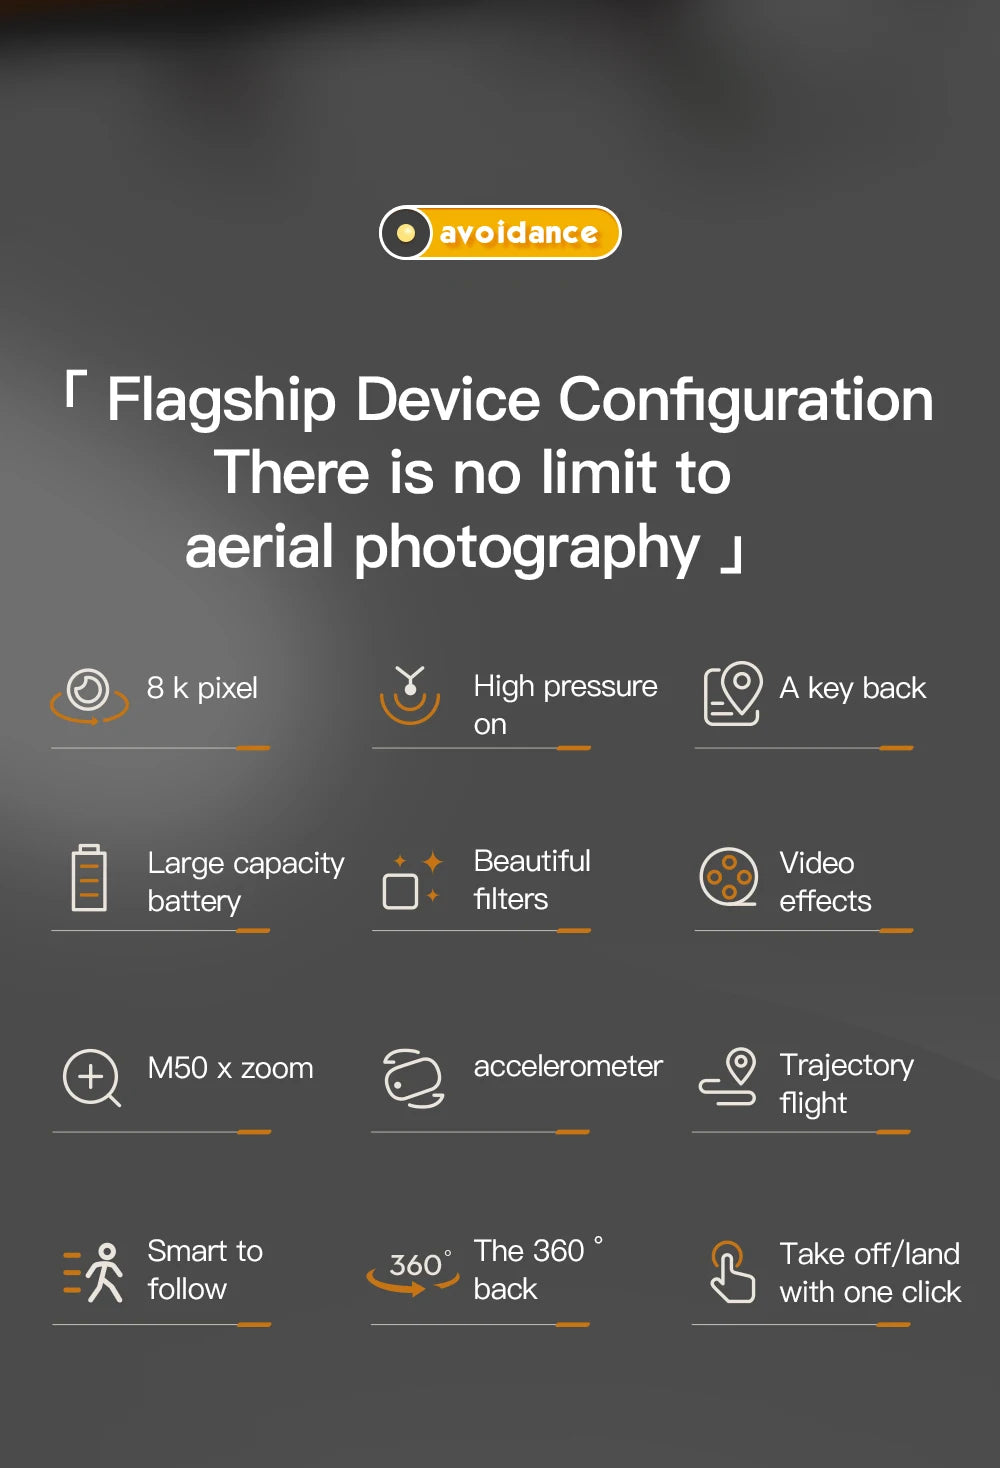 AE11 Drone, avoidance c flagship device configuration there is no limit to aerial photography